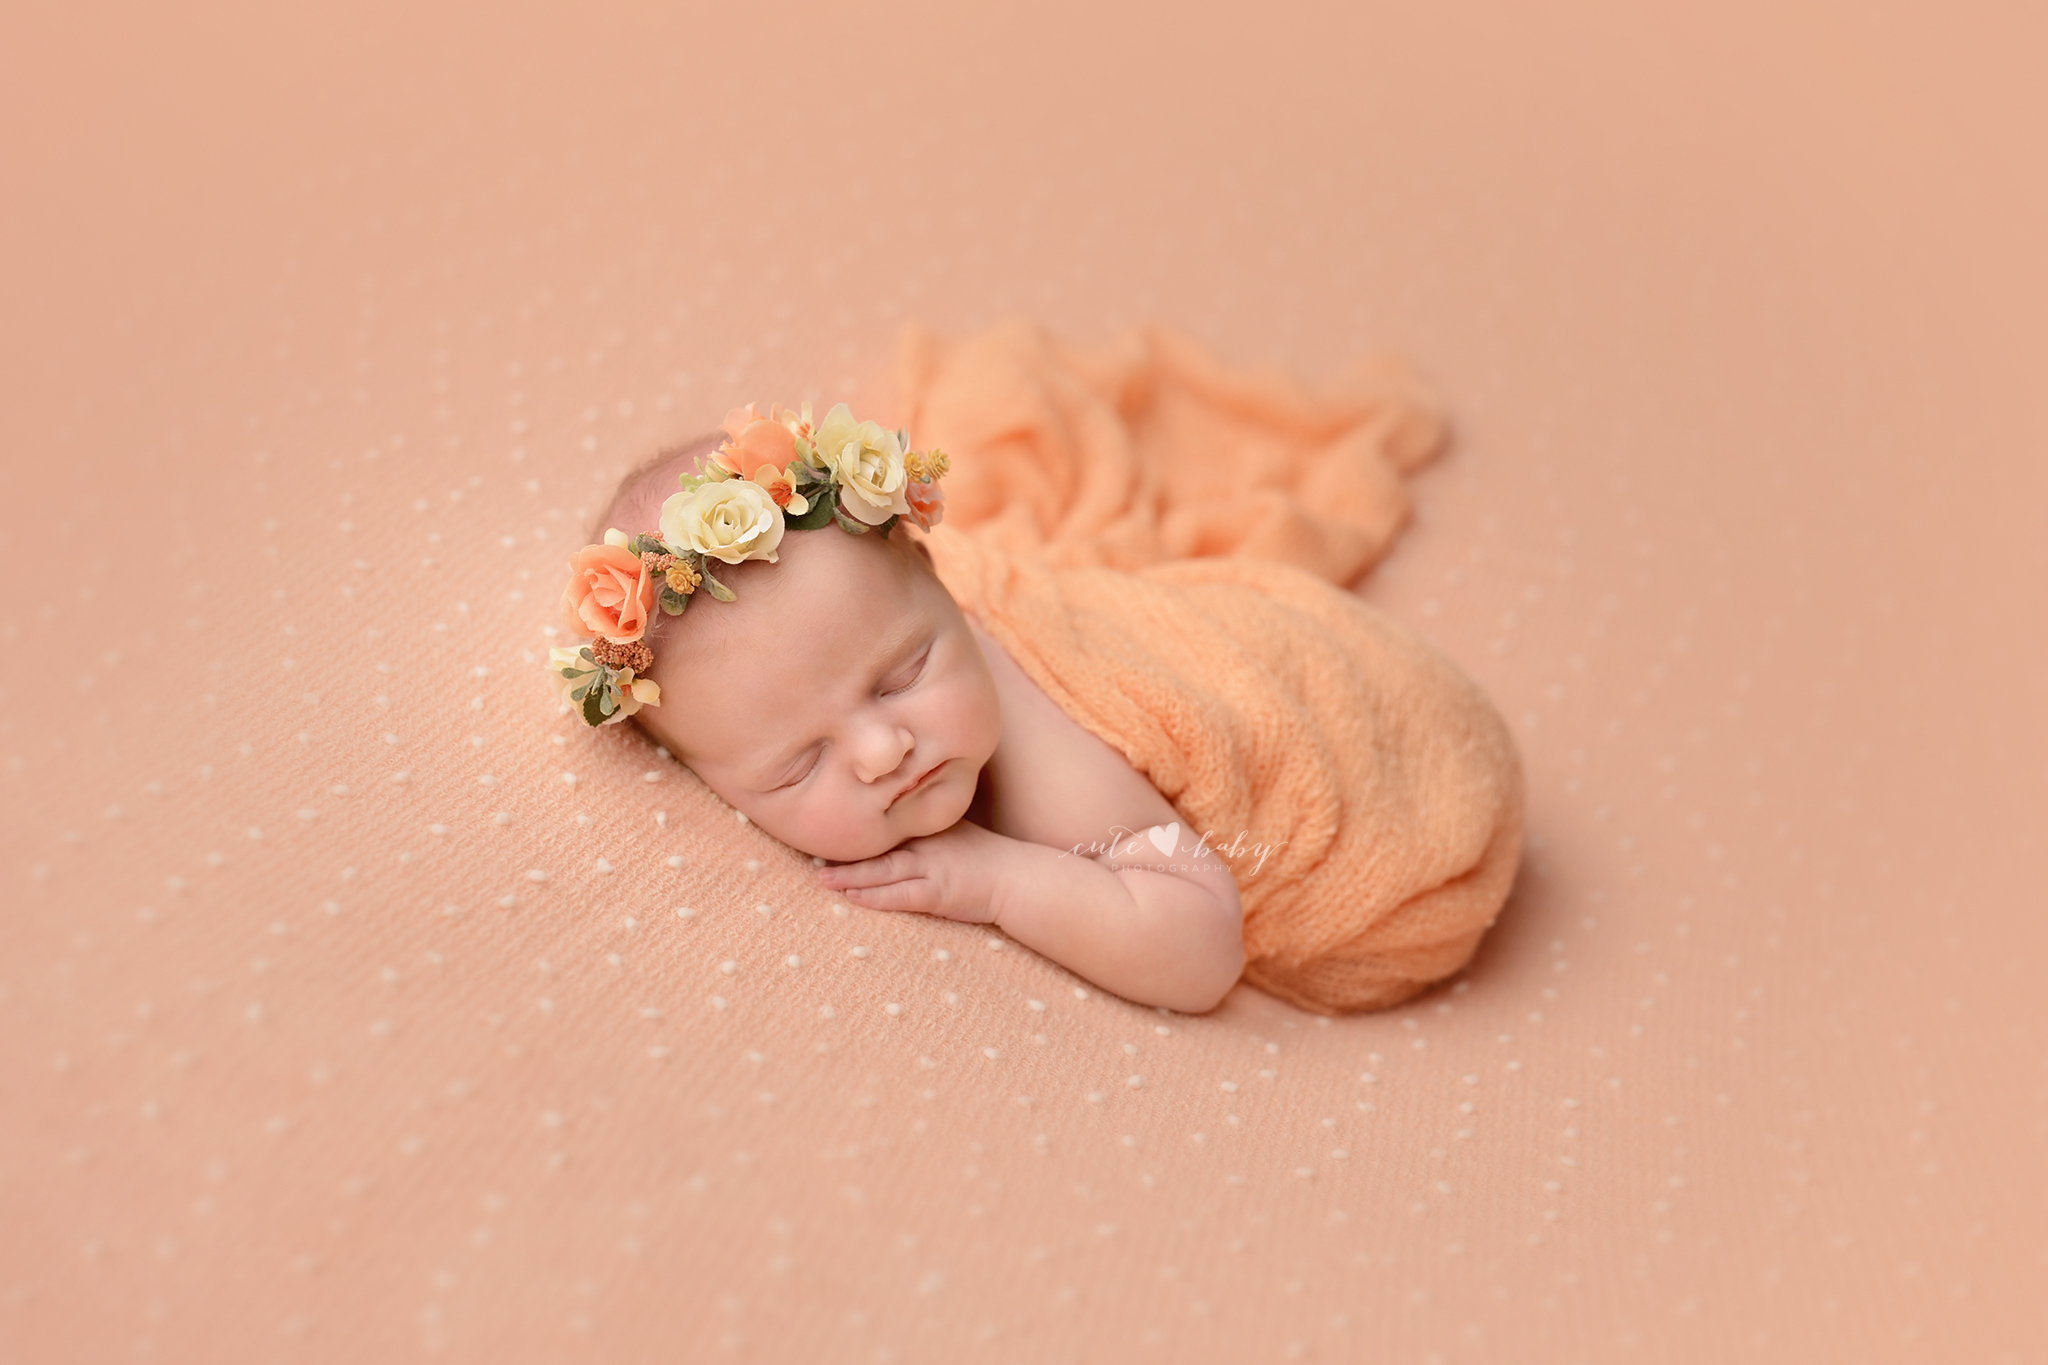 Newborn Photography Manchester by Cute Baby Photography, Newborn photography studio Greater Manchester, Baby Photography, Newborn Session Manchester<br />
